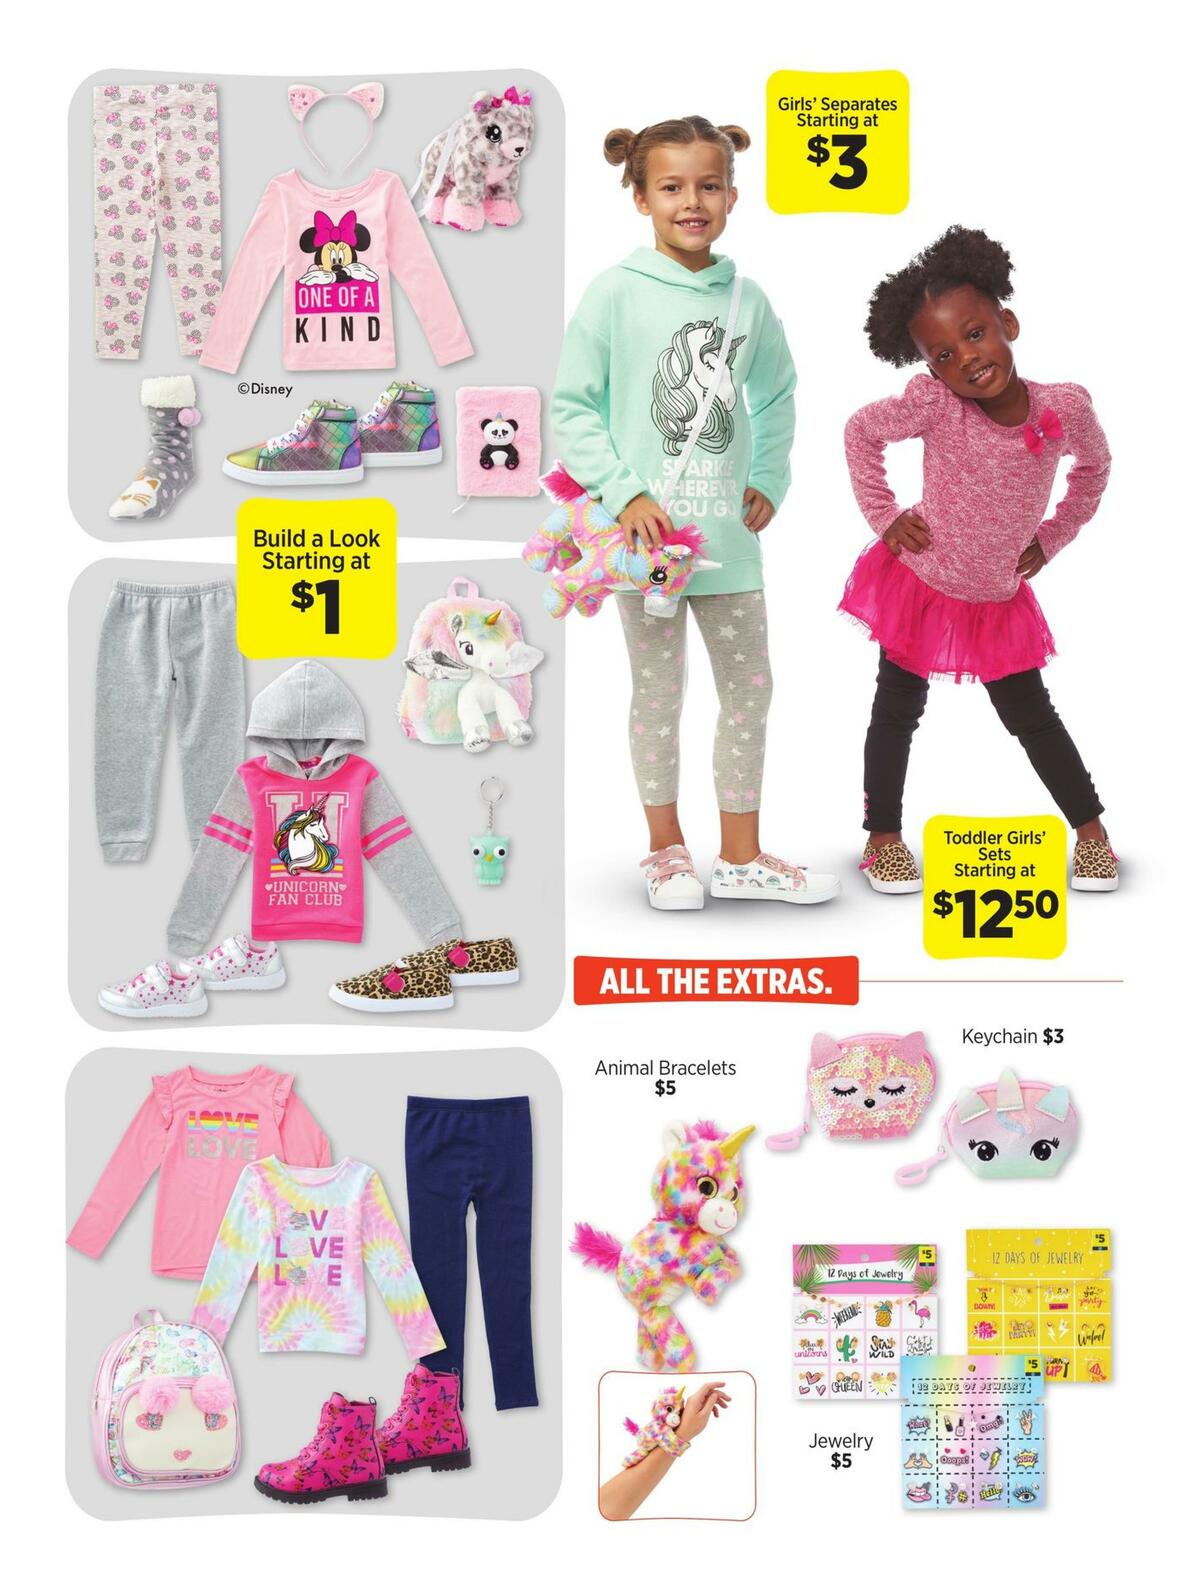 Dollar General Fall Apparel for the Whole Family Weekly Ad from October 21